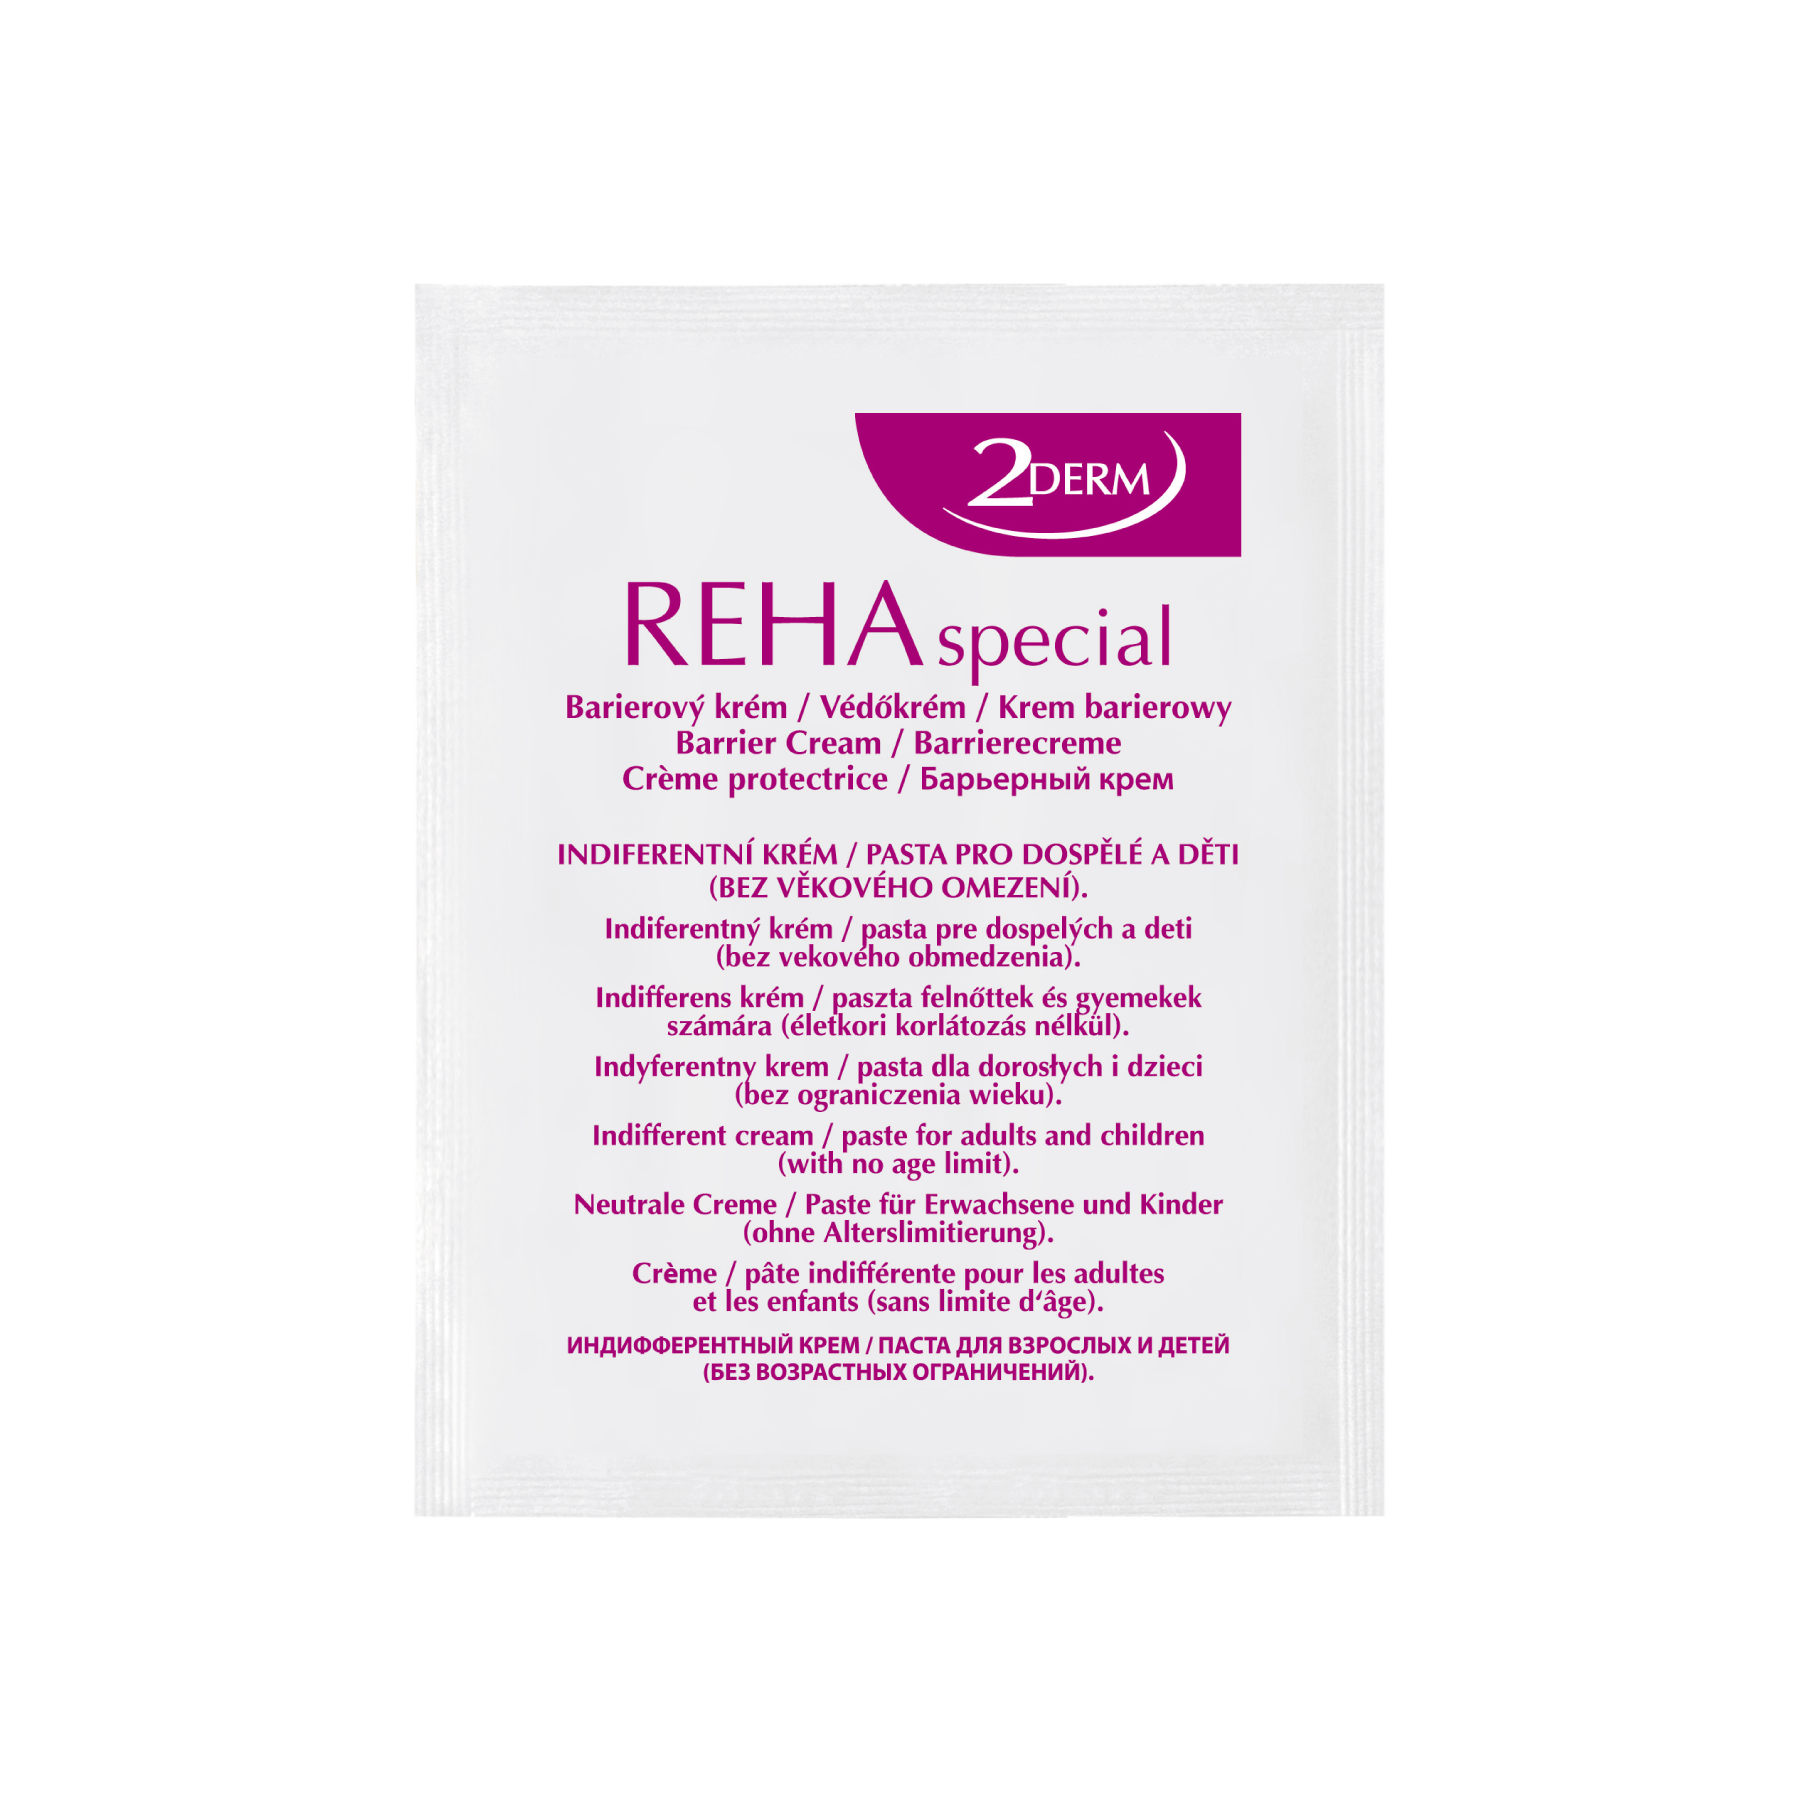 Image of 2DERM REHA SPECIAL BARRIERE CREME 4 ml, sample